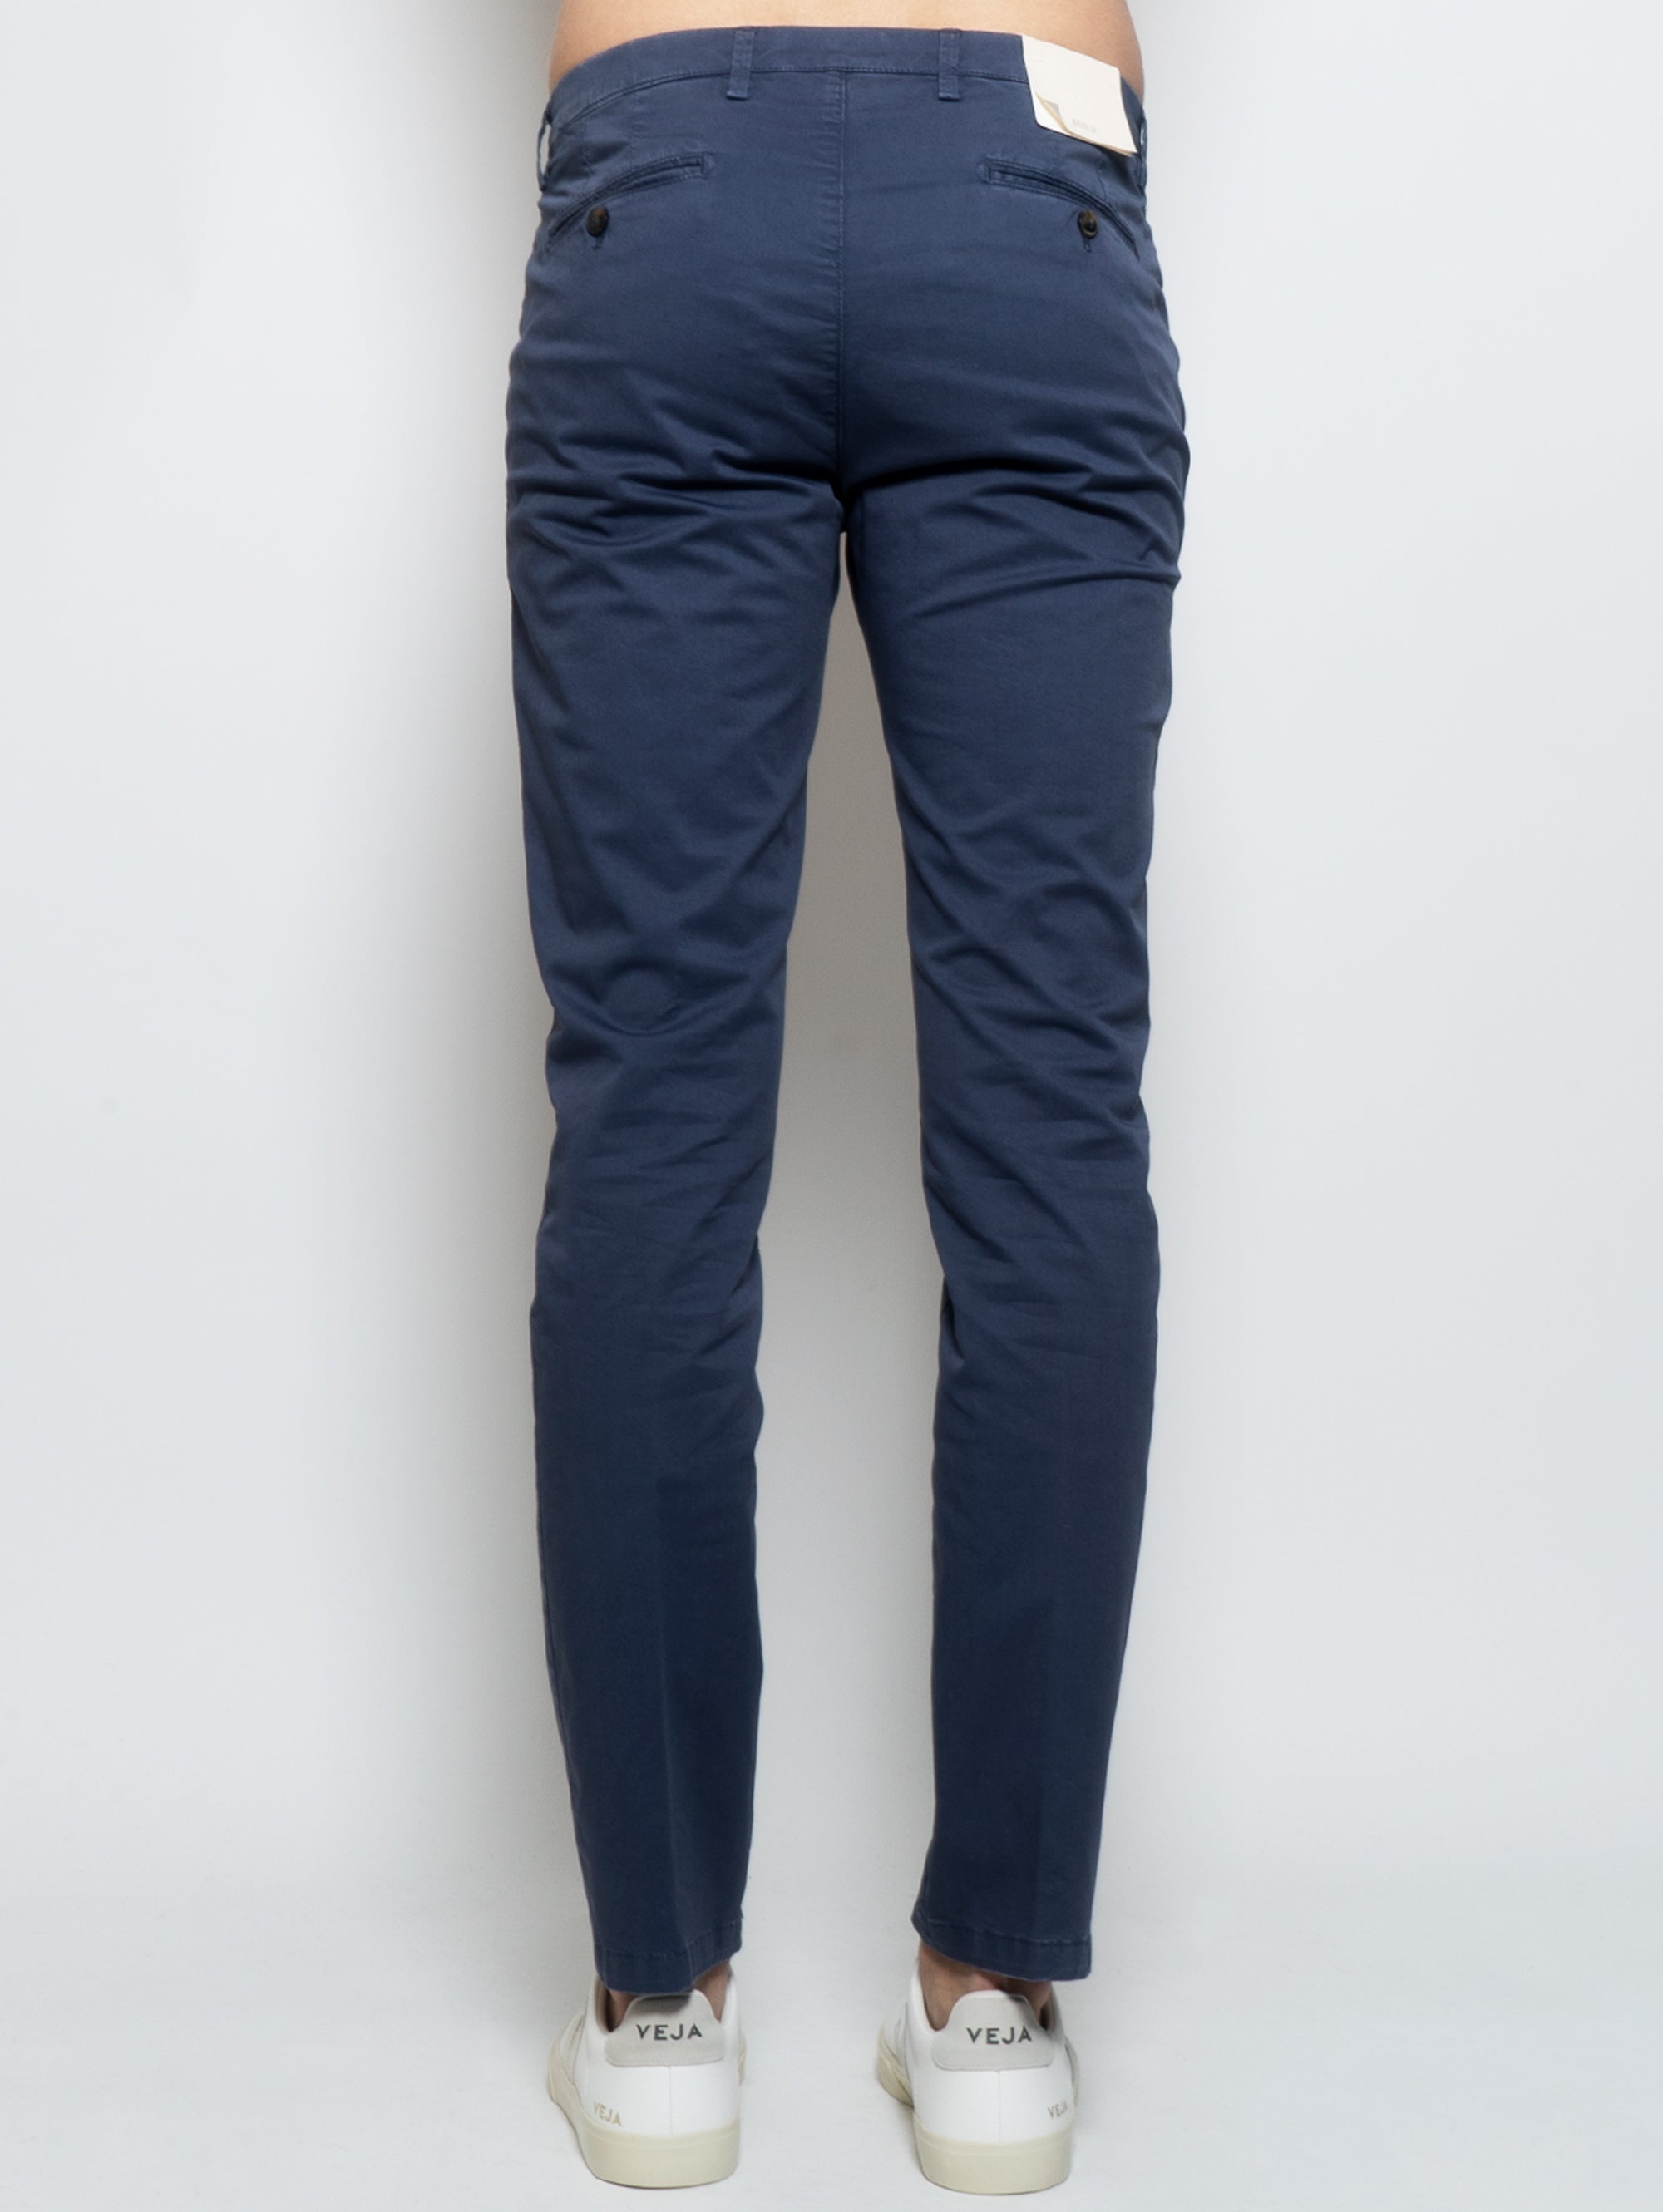 Chino Pants in Blue Cotton